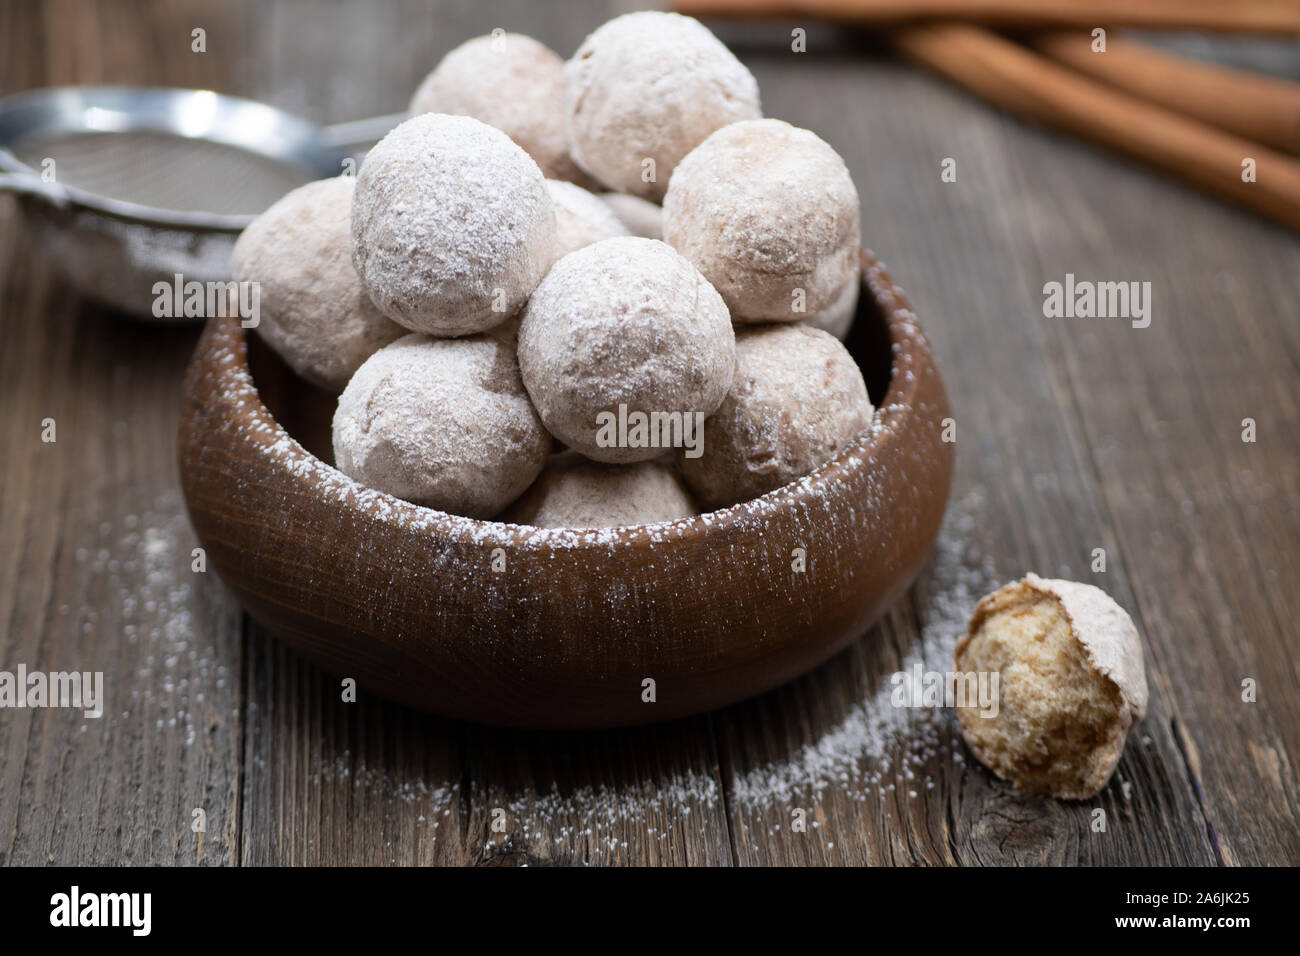 Wooden bowl with apple and spice donut holes, sprinkled with cinnamon sugar Stock Photo